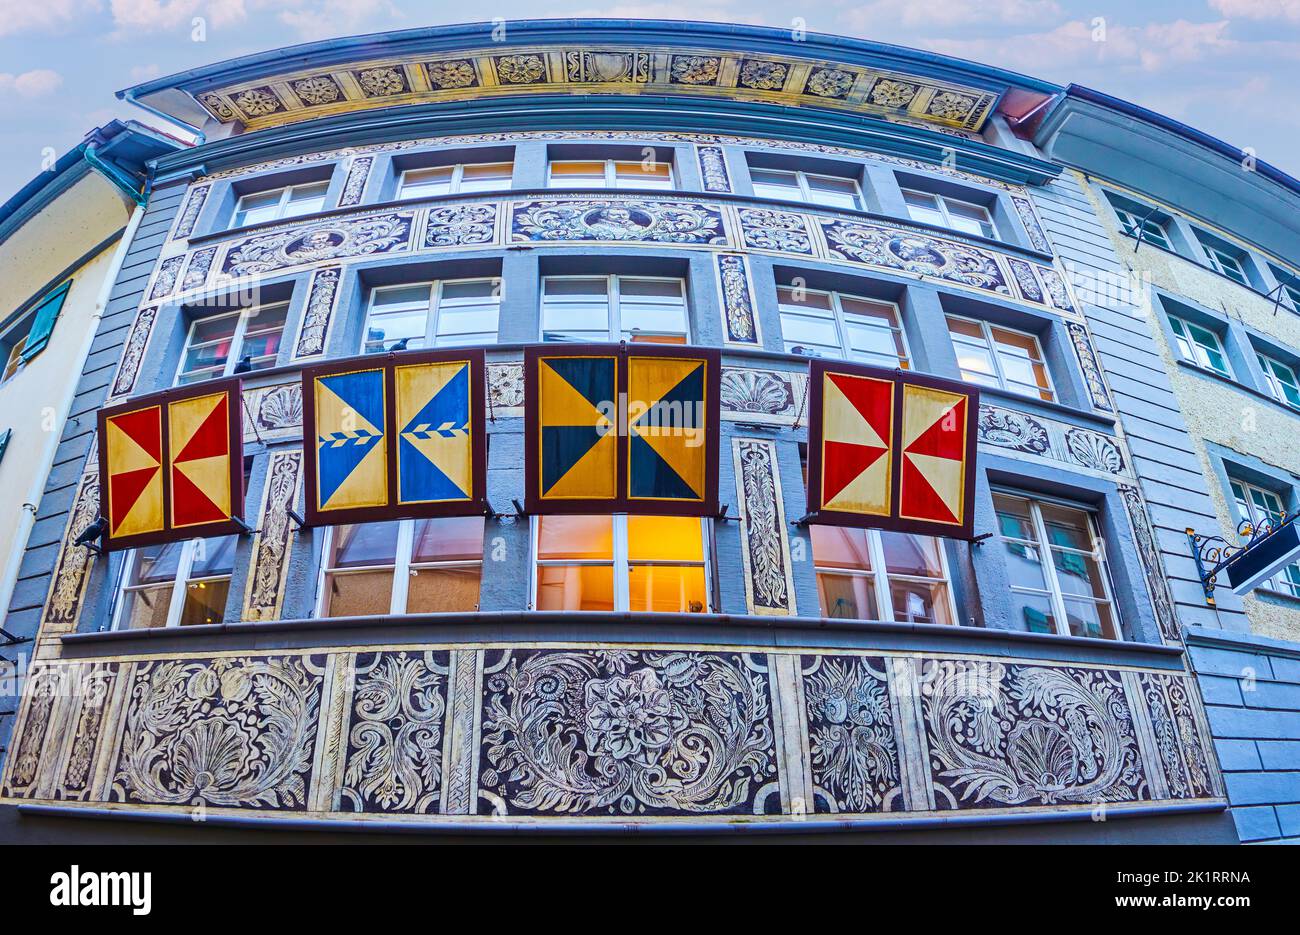 Outstanding historical frescoes  and guild flags on facades of townhouses in Lucerne, Switzerland Stock Photo